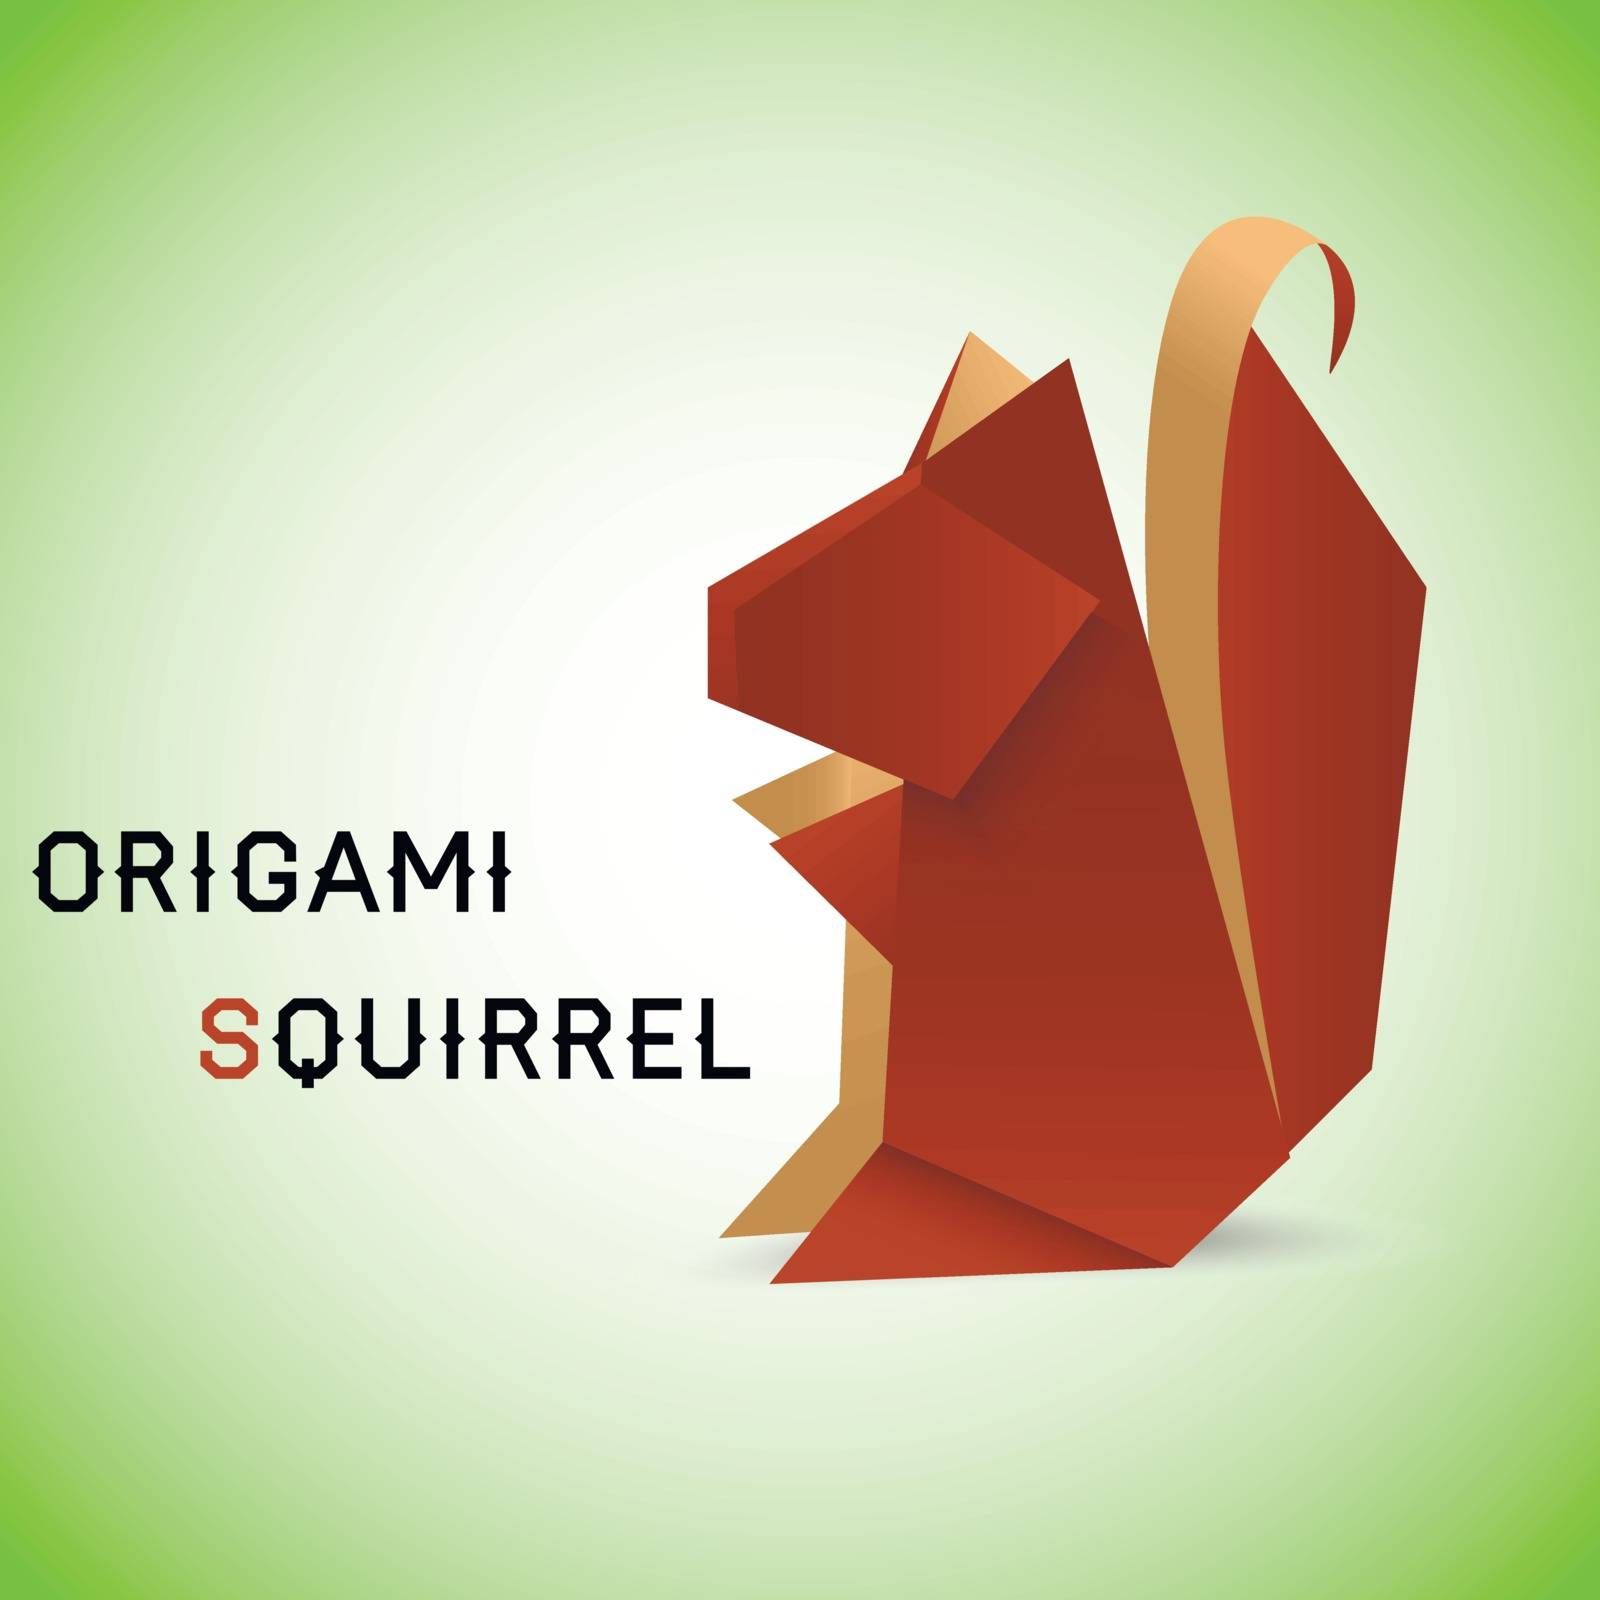 Vector illustration of an origami squirrel